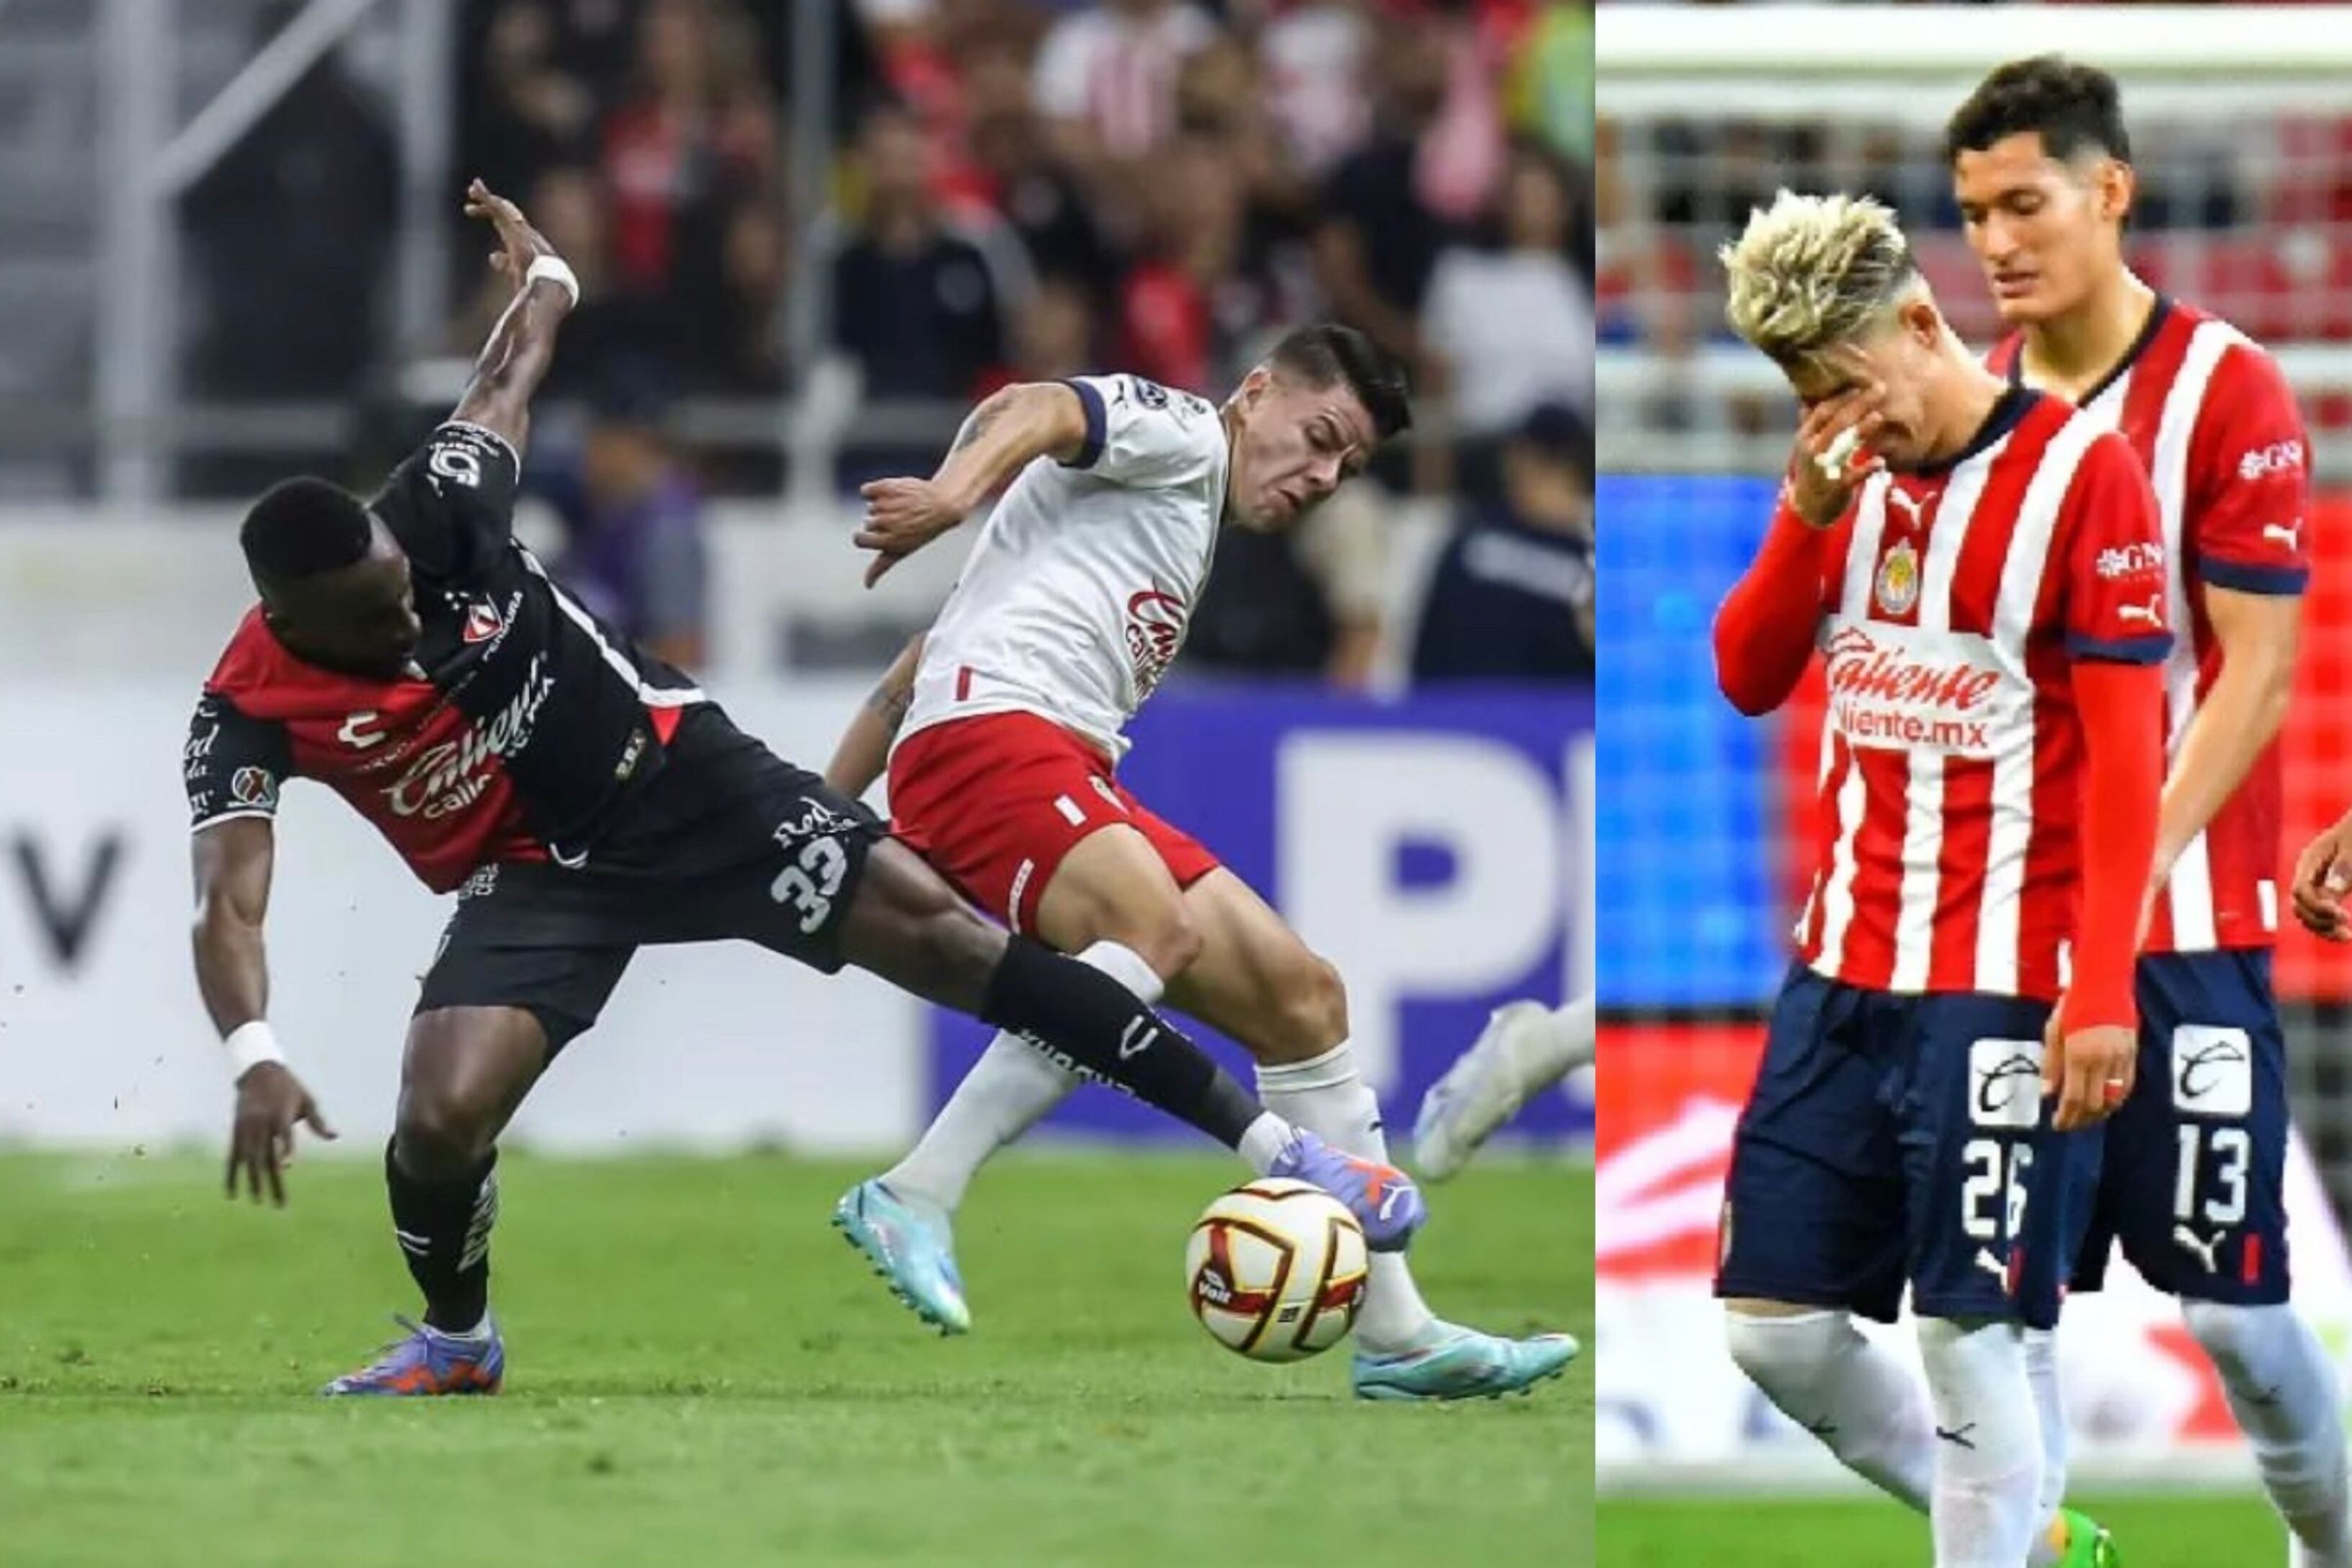 Chivas could not beat Atlas and now they will have to pay the consequences